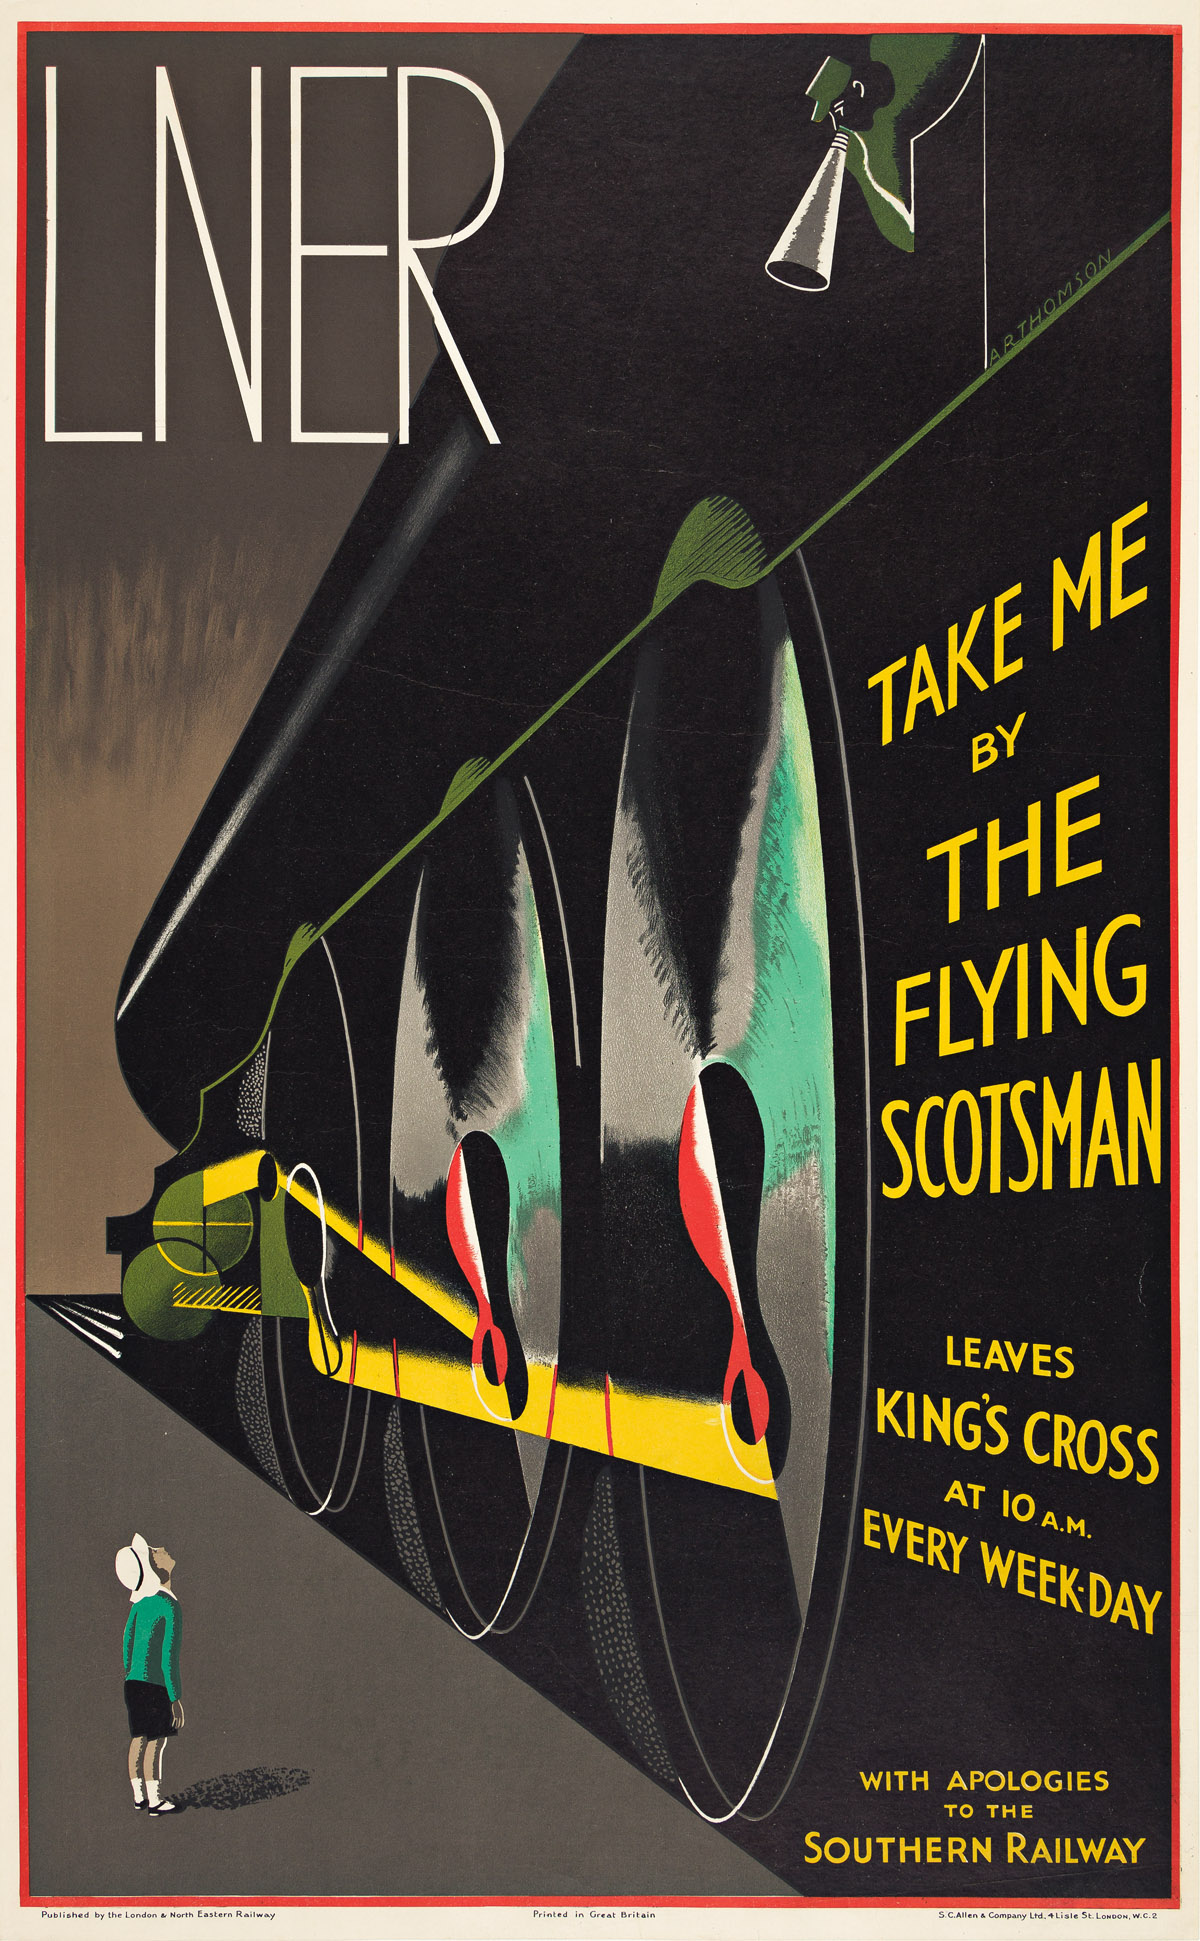 ALFRED REGINALD THOMSON (1895-1979).  LNER / TAKE ME BY THE FLYING SCOTSMAN. Circa 1936. 39½x24½ inches, 100¼x61 cm. S.C. Allen & Compa